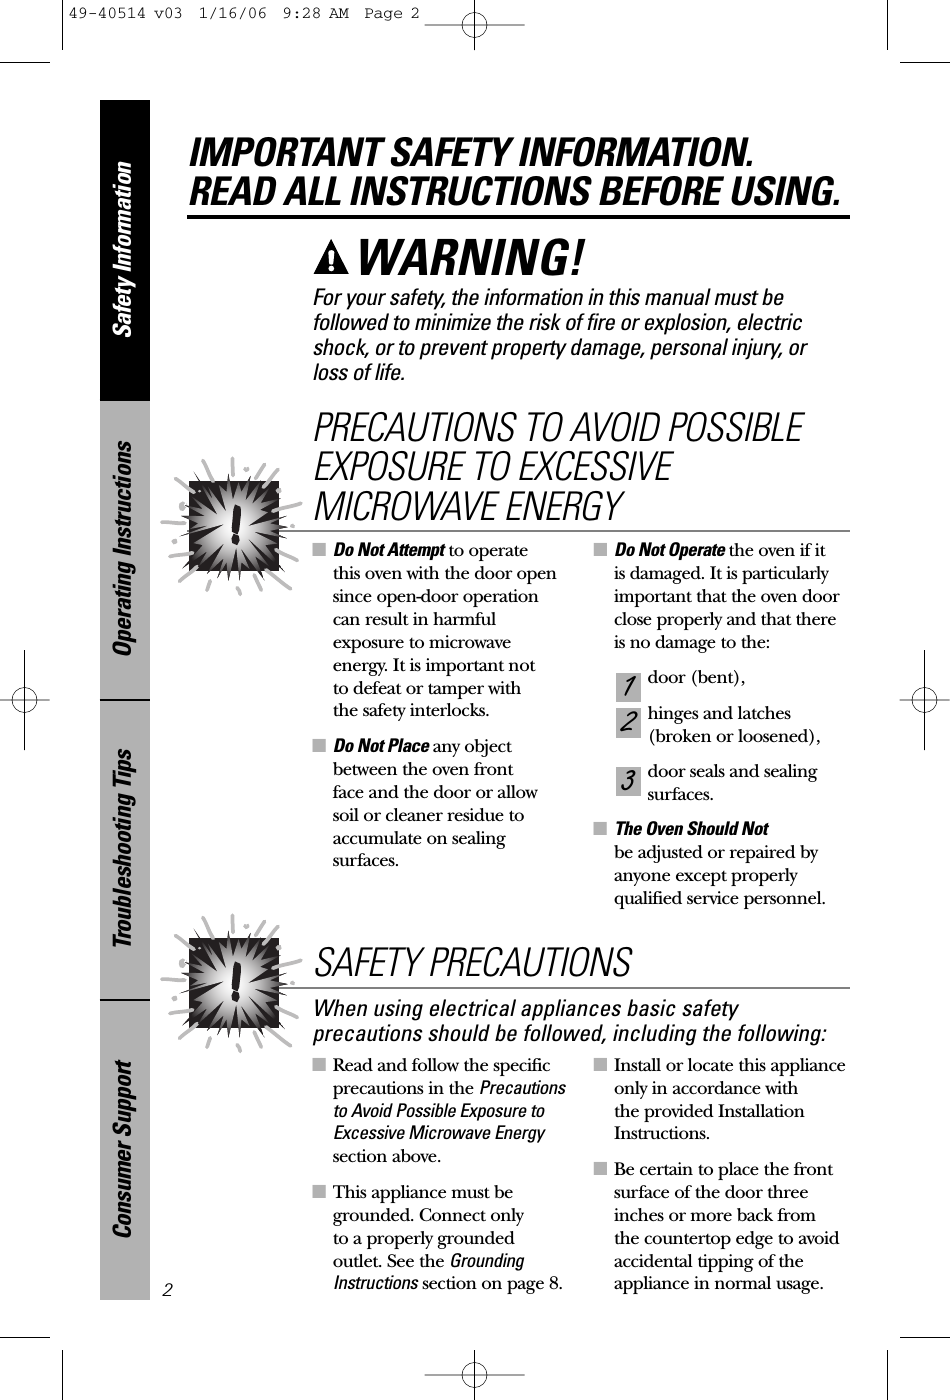 ■Read and follow the specificprecautions in the Precautionsto Avoid Possible Exposure toExcessive Microwave Energysection above.■This appliance must begrounded. Connect only to a properly groundedoutlet. See the GroundingInstructions section on page 8.■Install or locate this applianceonly in accordance with the provided InstallationInstructions.■Be certain to place the frontsurface of the door threeinches or more back from the countertop edge to avoidaccidental tipping of theappliance in normal usage.■Do Not Attempt to operate this oven with the door opensince open-door operationcan result in harmfulexposure to microwaveenergy. It is important not to defeat or tamper with the safety interlocks.■Do Not Place any objectbetween the oven front face and the door or allow soil or cleaner residue toaccumulate on sealingsurfaces.■Do Not Operate the oven if it is damaged. It is particularlyimportant that the oven doorclose properly and that thereis no damage to the:door (bent),hinges and latches (broken or loosened),door seals and sealingsurfaces.■The Oven Should Not be adjusted or repaired byanyone except properlyqualified service personnel.321PRECAUTIONS TO AVOID POSSIBLEEXPOSURE TO EXCESSIVEMICROWAVE ENERGYSafety InformationOperating InstructionsTroubleshooting TipsConsumer SupportIMPORTANT SAFETY INFORMATION.READ ALL INSTRUCTIONS BEFORE USING.2For your safety, the information in this manual must befollowed to minimize the risk of fire or explosion, electricshock, or to prevent property damage, personal injury, or loss of life.WARNING! When using electrical appliances basic safetyprecautions should be followed, including the following:SAFETY PRECAUTIONS49-40514 v03  1/16/06  9:28 AM  Page 2